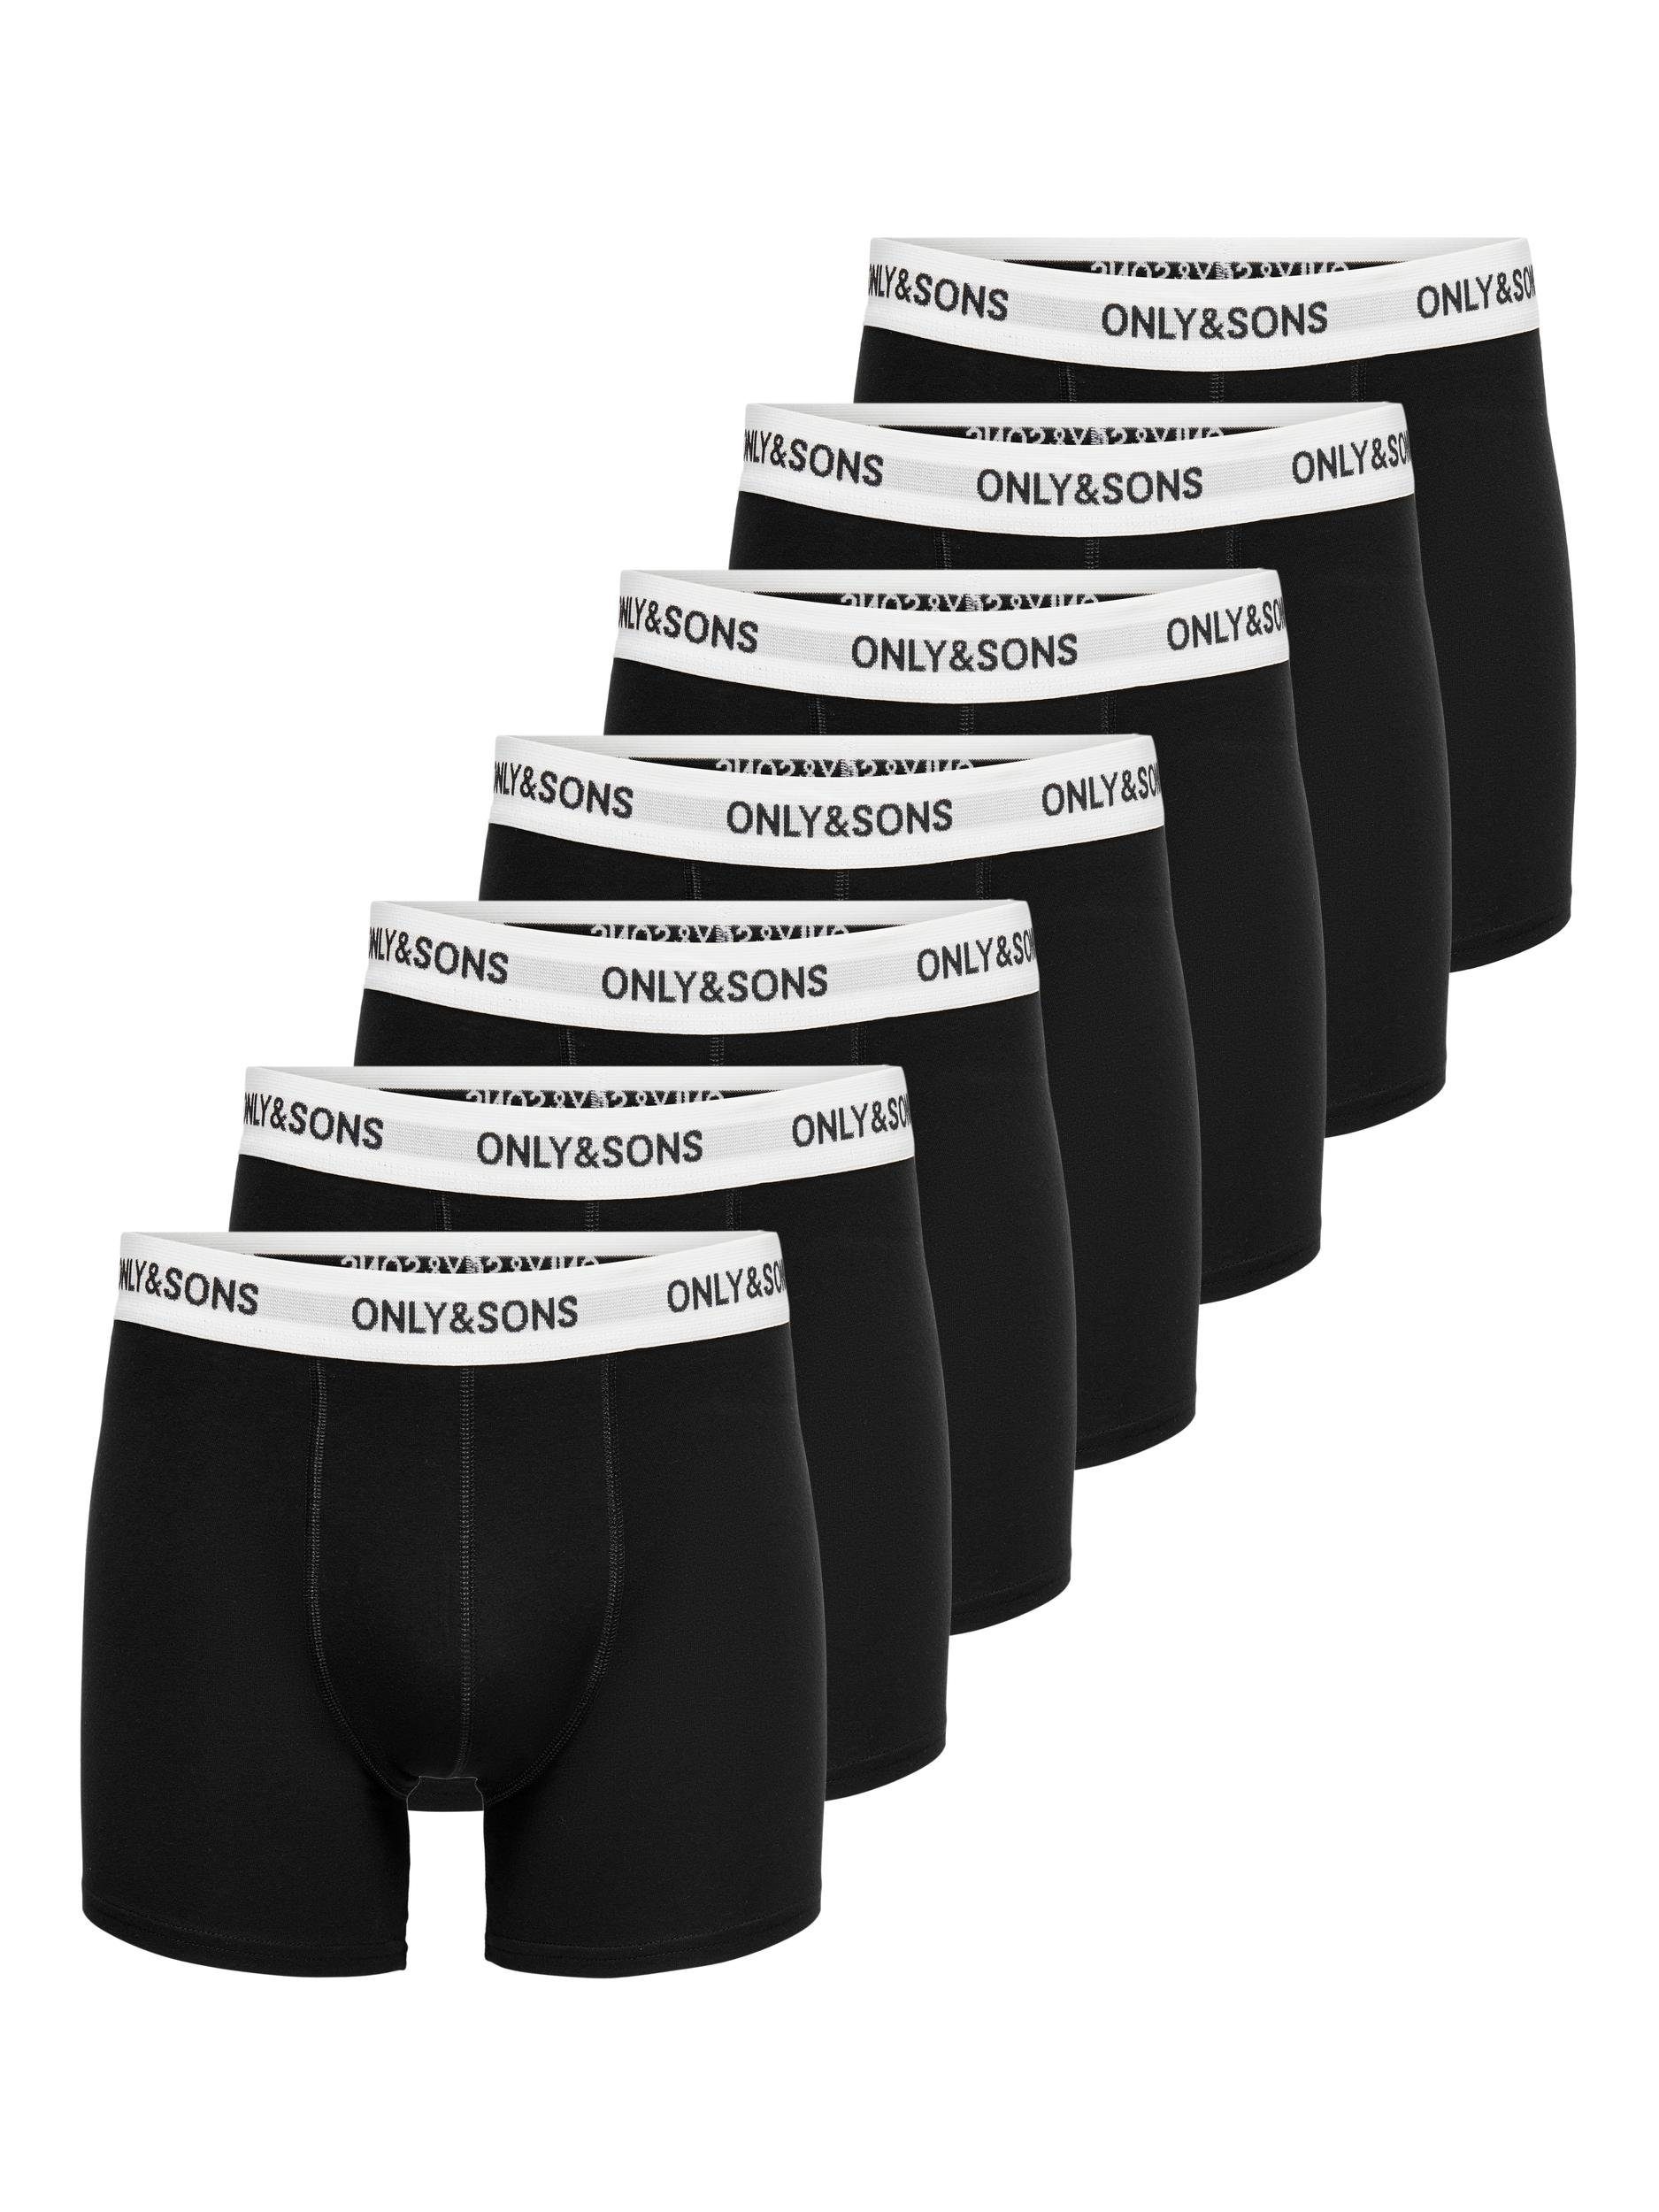 NOOS 7-PACK ONLY SONS BLACK TRUNK white 7-St) Black SOLID waist Trunk (Packung, ONSFITZ &